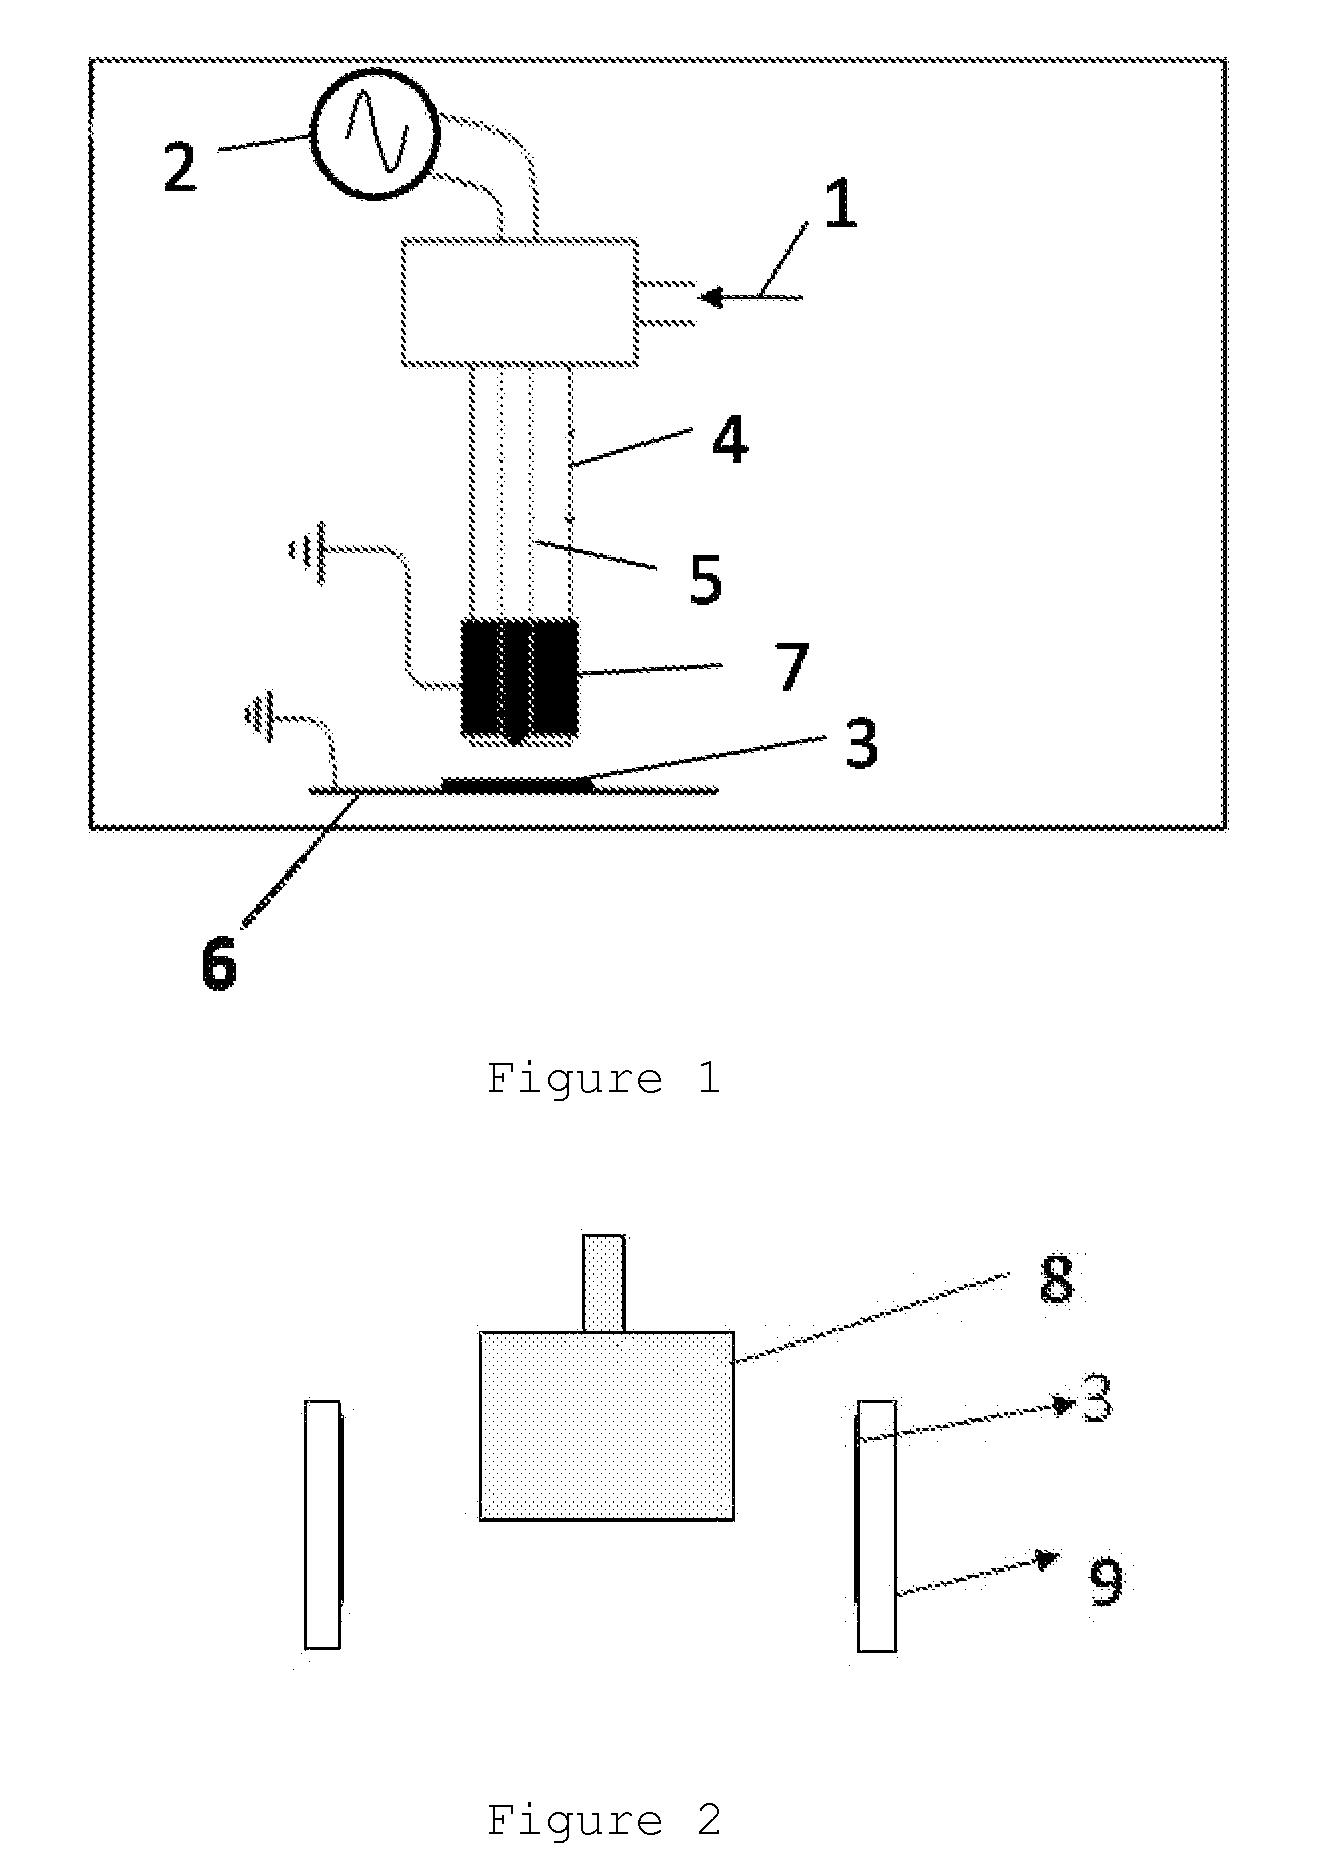 Method for depositing a fluorinated layer from a precursor monomer